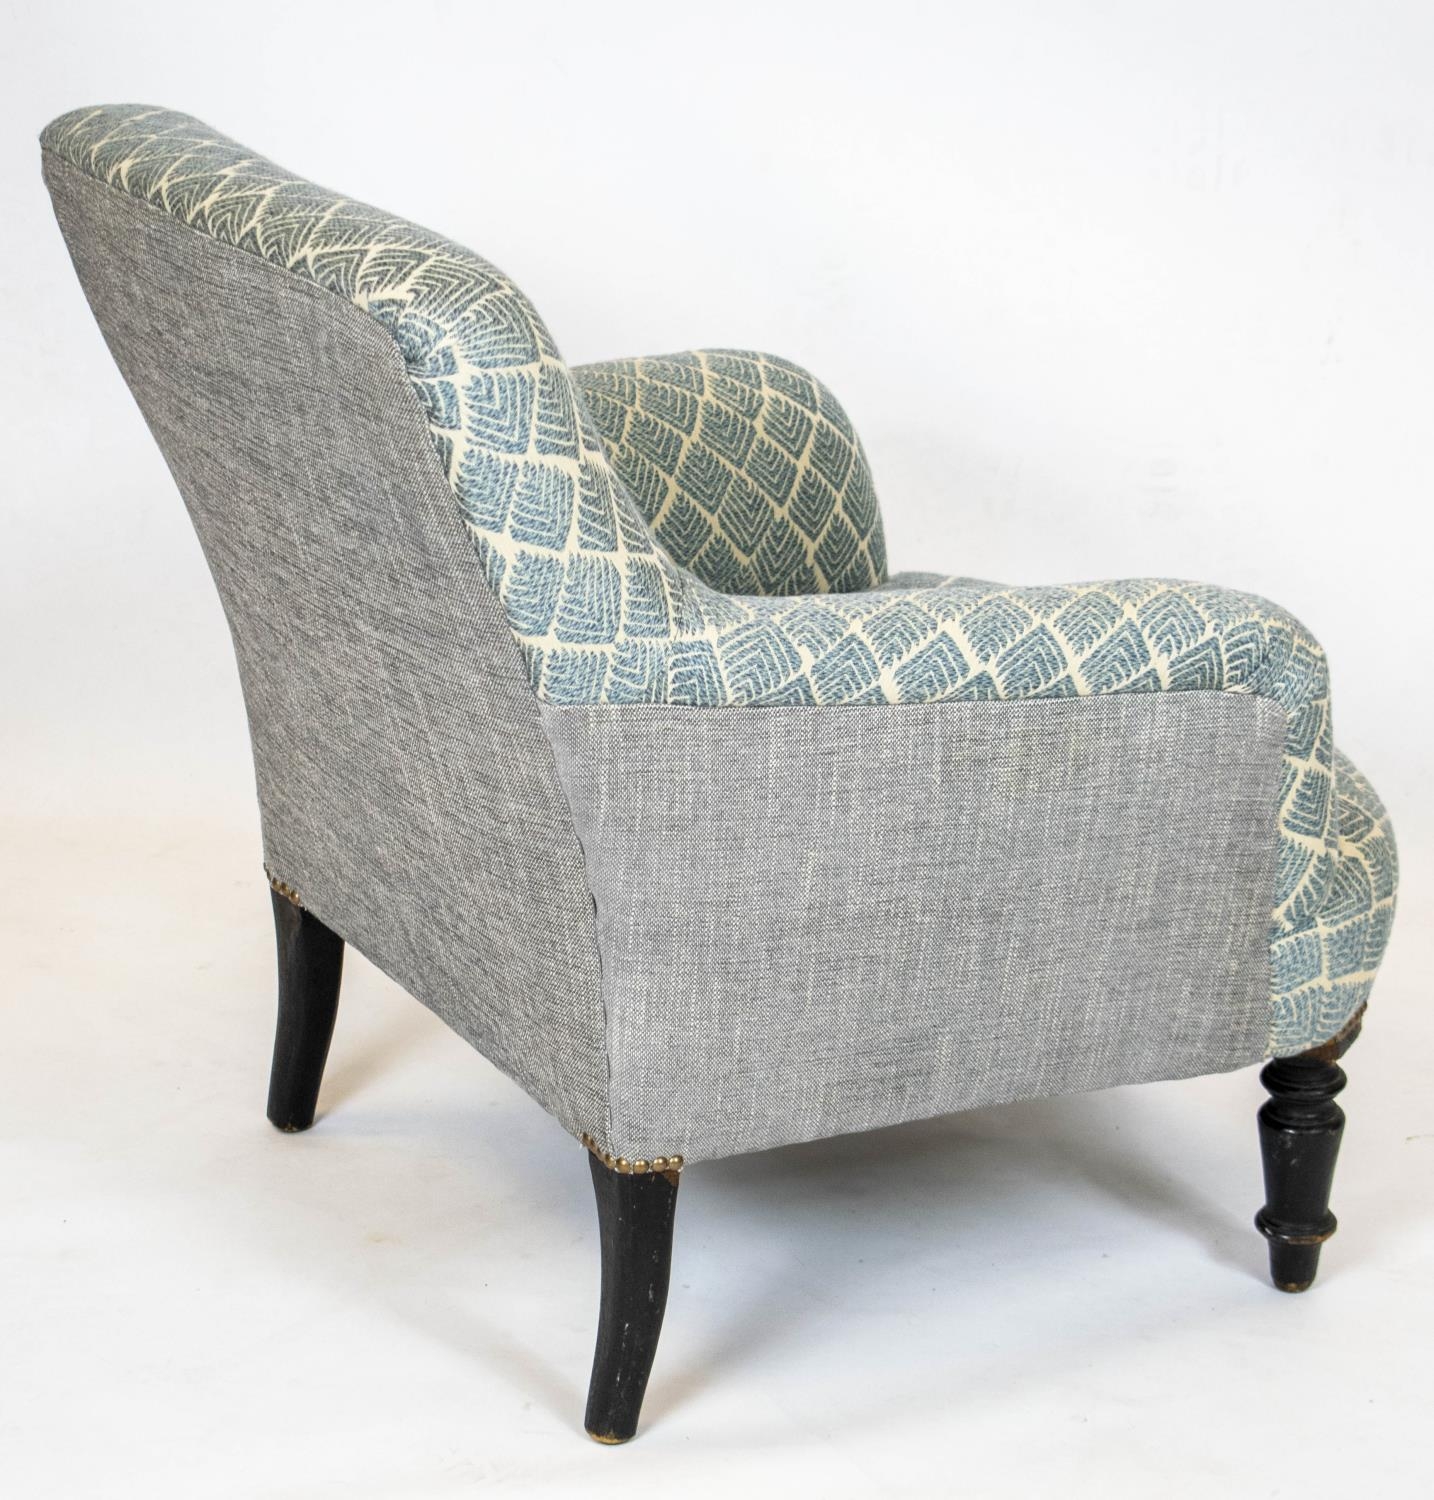 ARMCHAIR, 73cm H x 68cm, Napoleon III ebonised in Guy Goodfellow patterned fabric. - Image 3 of 5